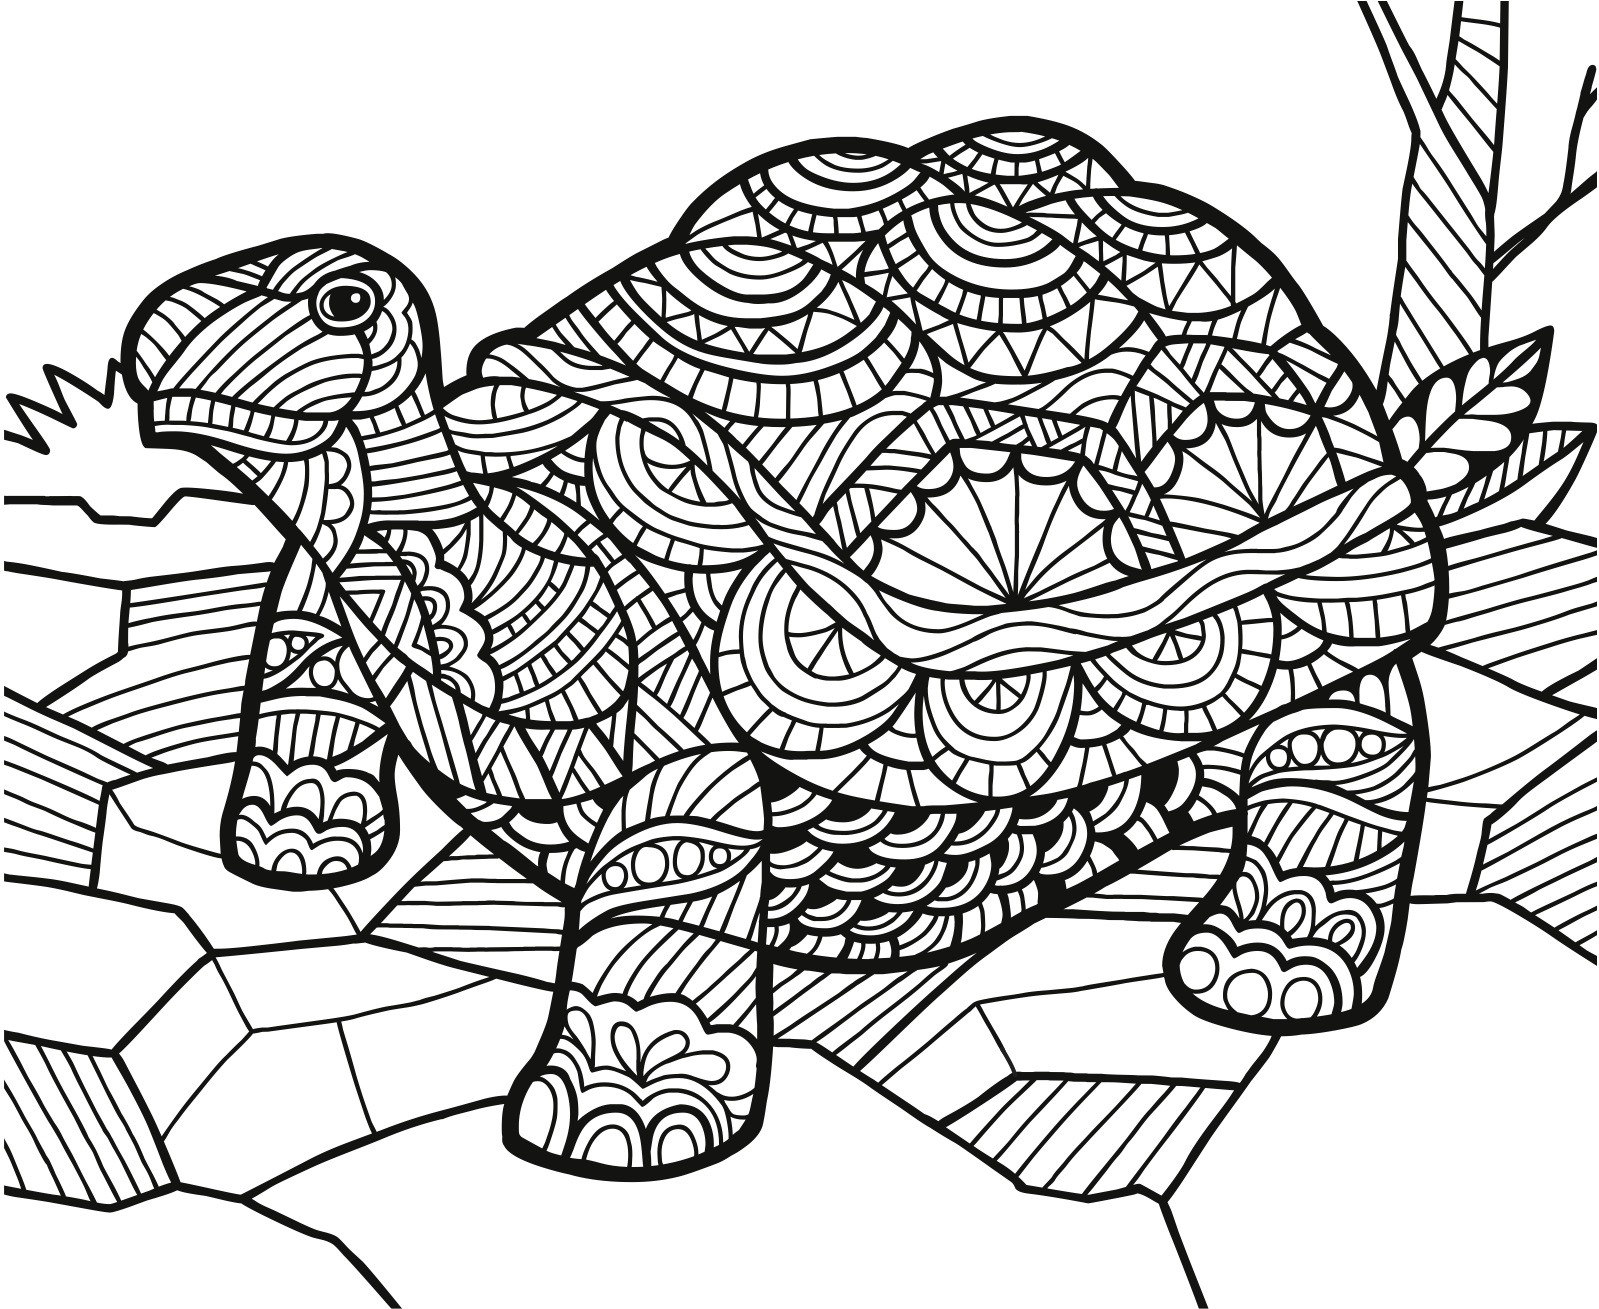 Freebie Friday 07-12-19 Wild Animals Coloring Page